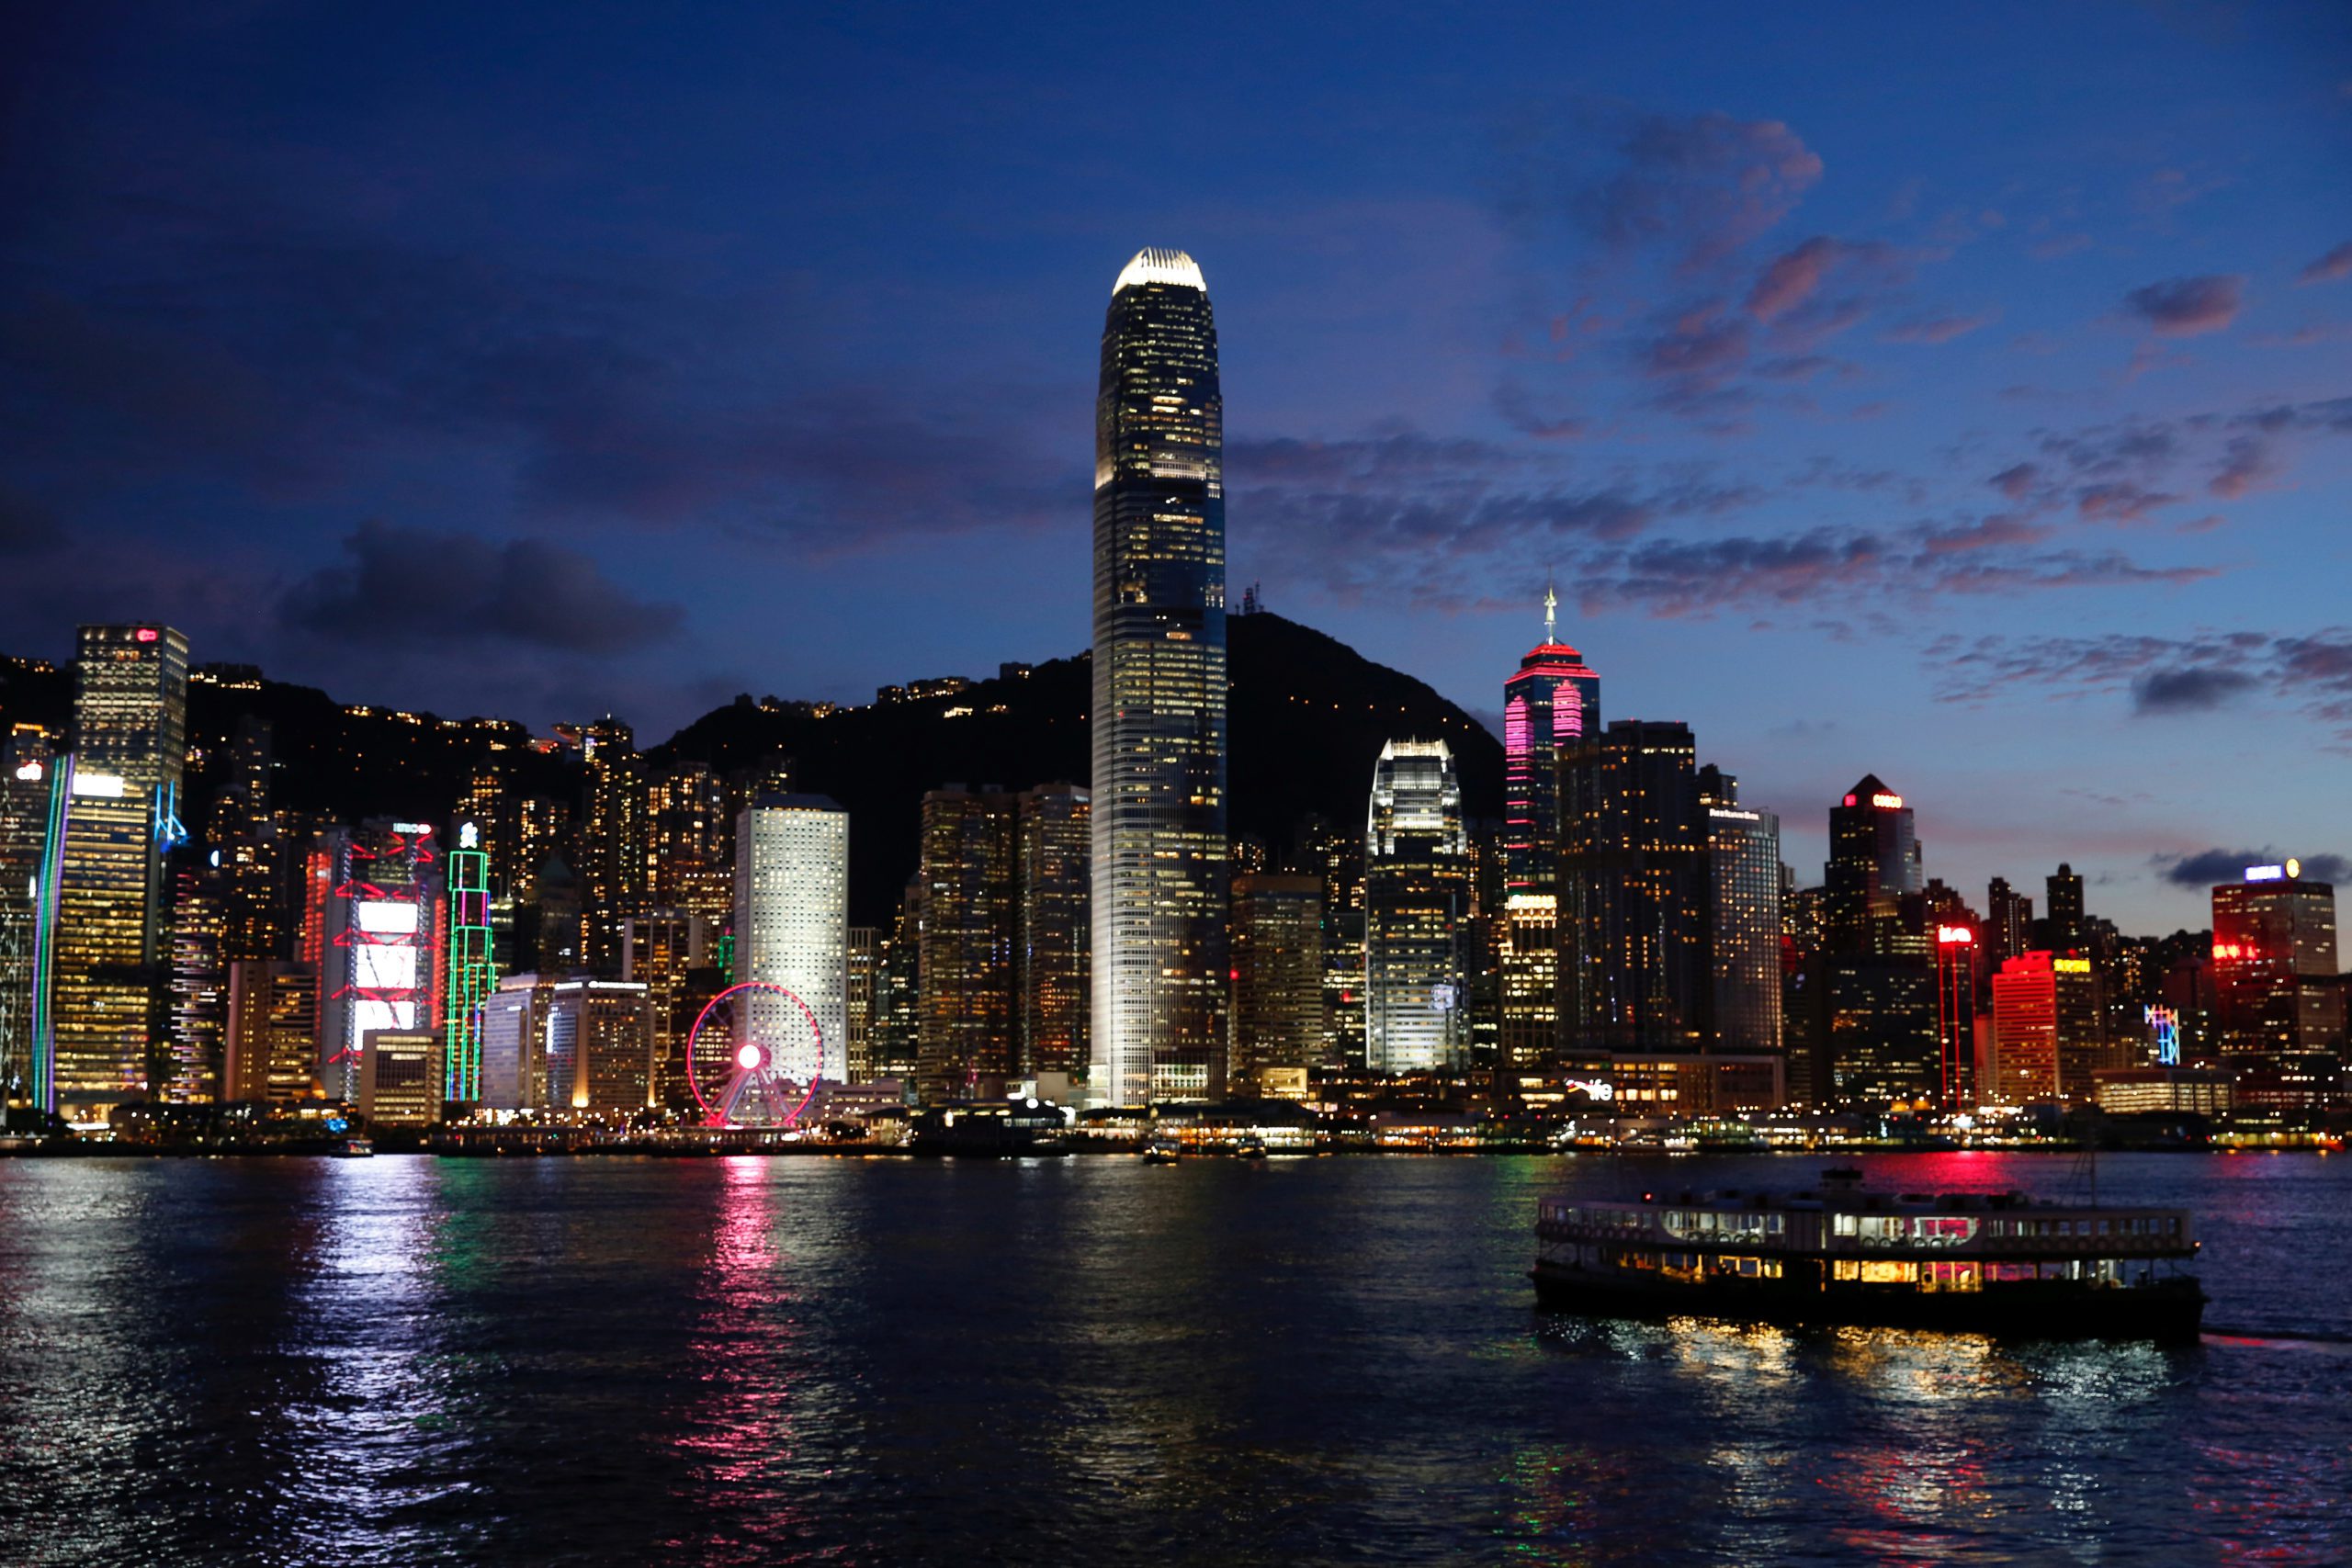 A Star Ferry boat crosses Victoria Harbour in front of a skyline of buildings during sunset, as a meeting on national security legislation takes place in Hong Kong, China June 29, 2020. REUTERS/Tyrone Siu - RC21JH93NO4E